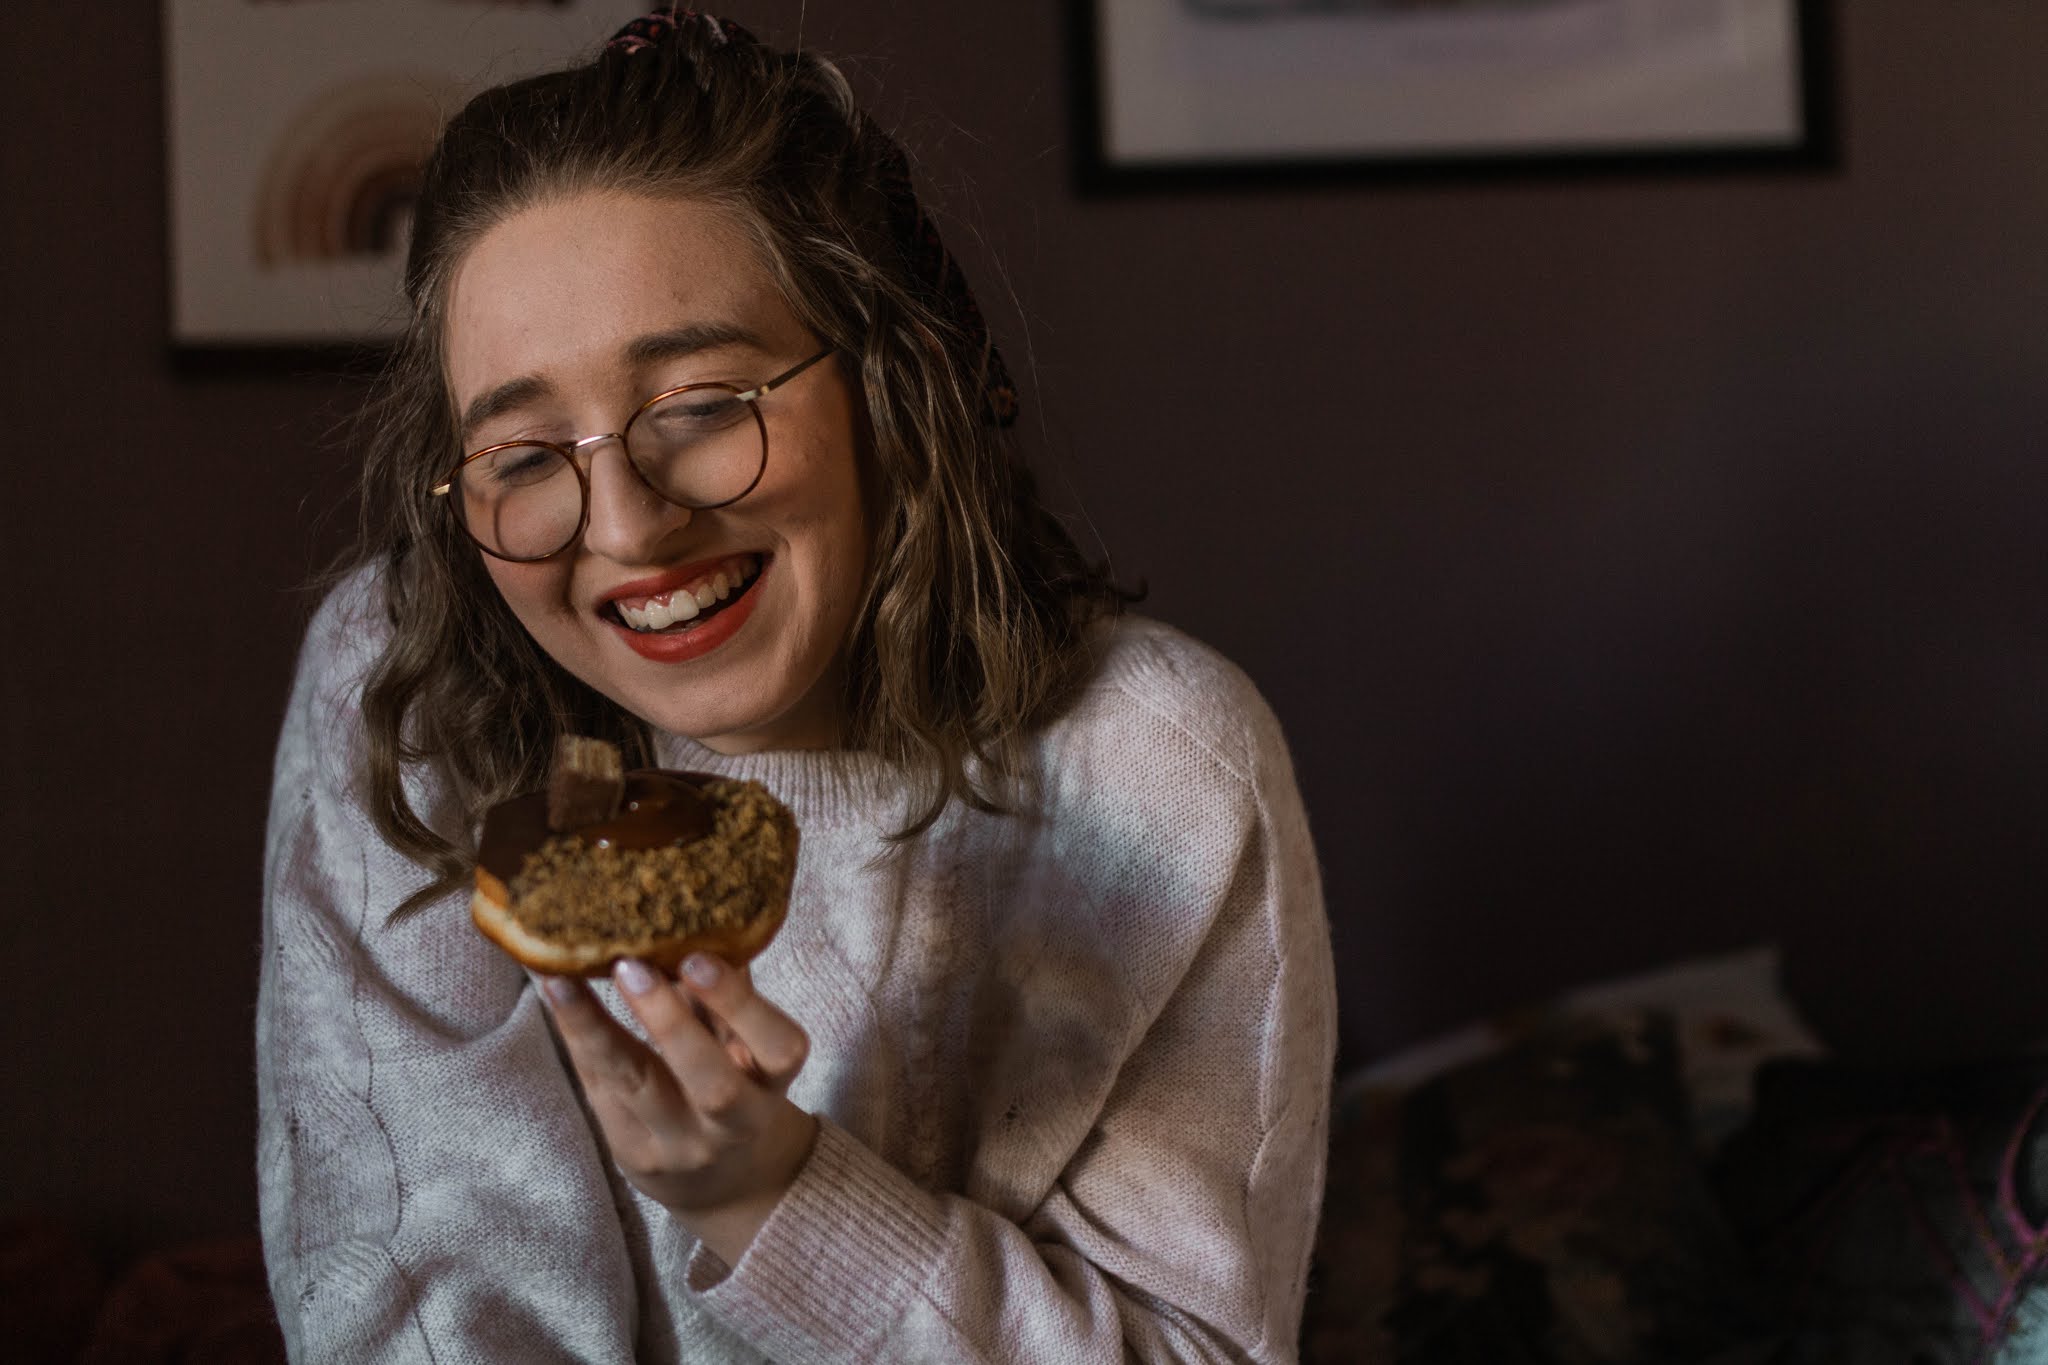 girl smiling while holding a chocolate donut